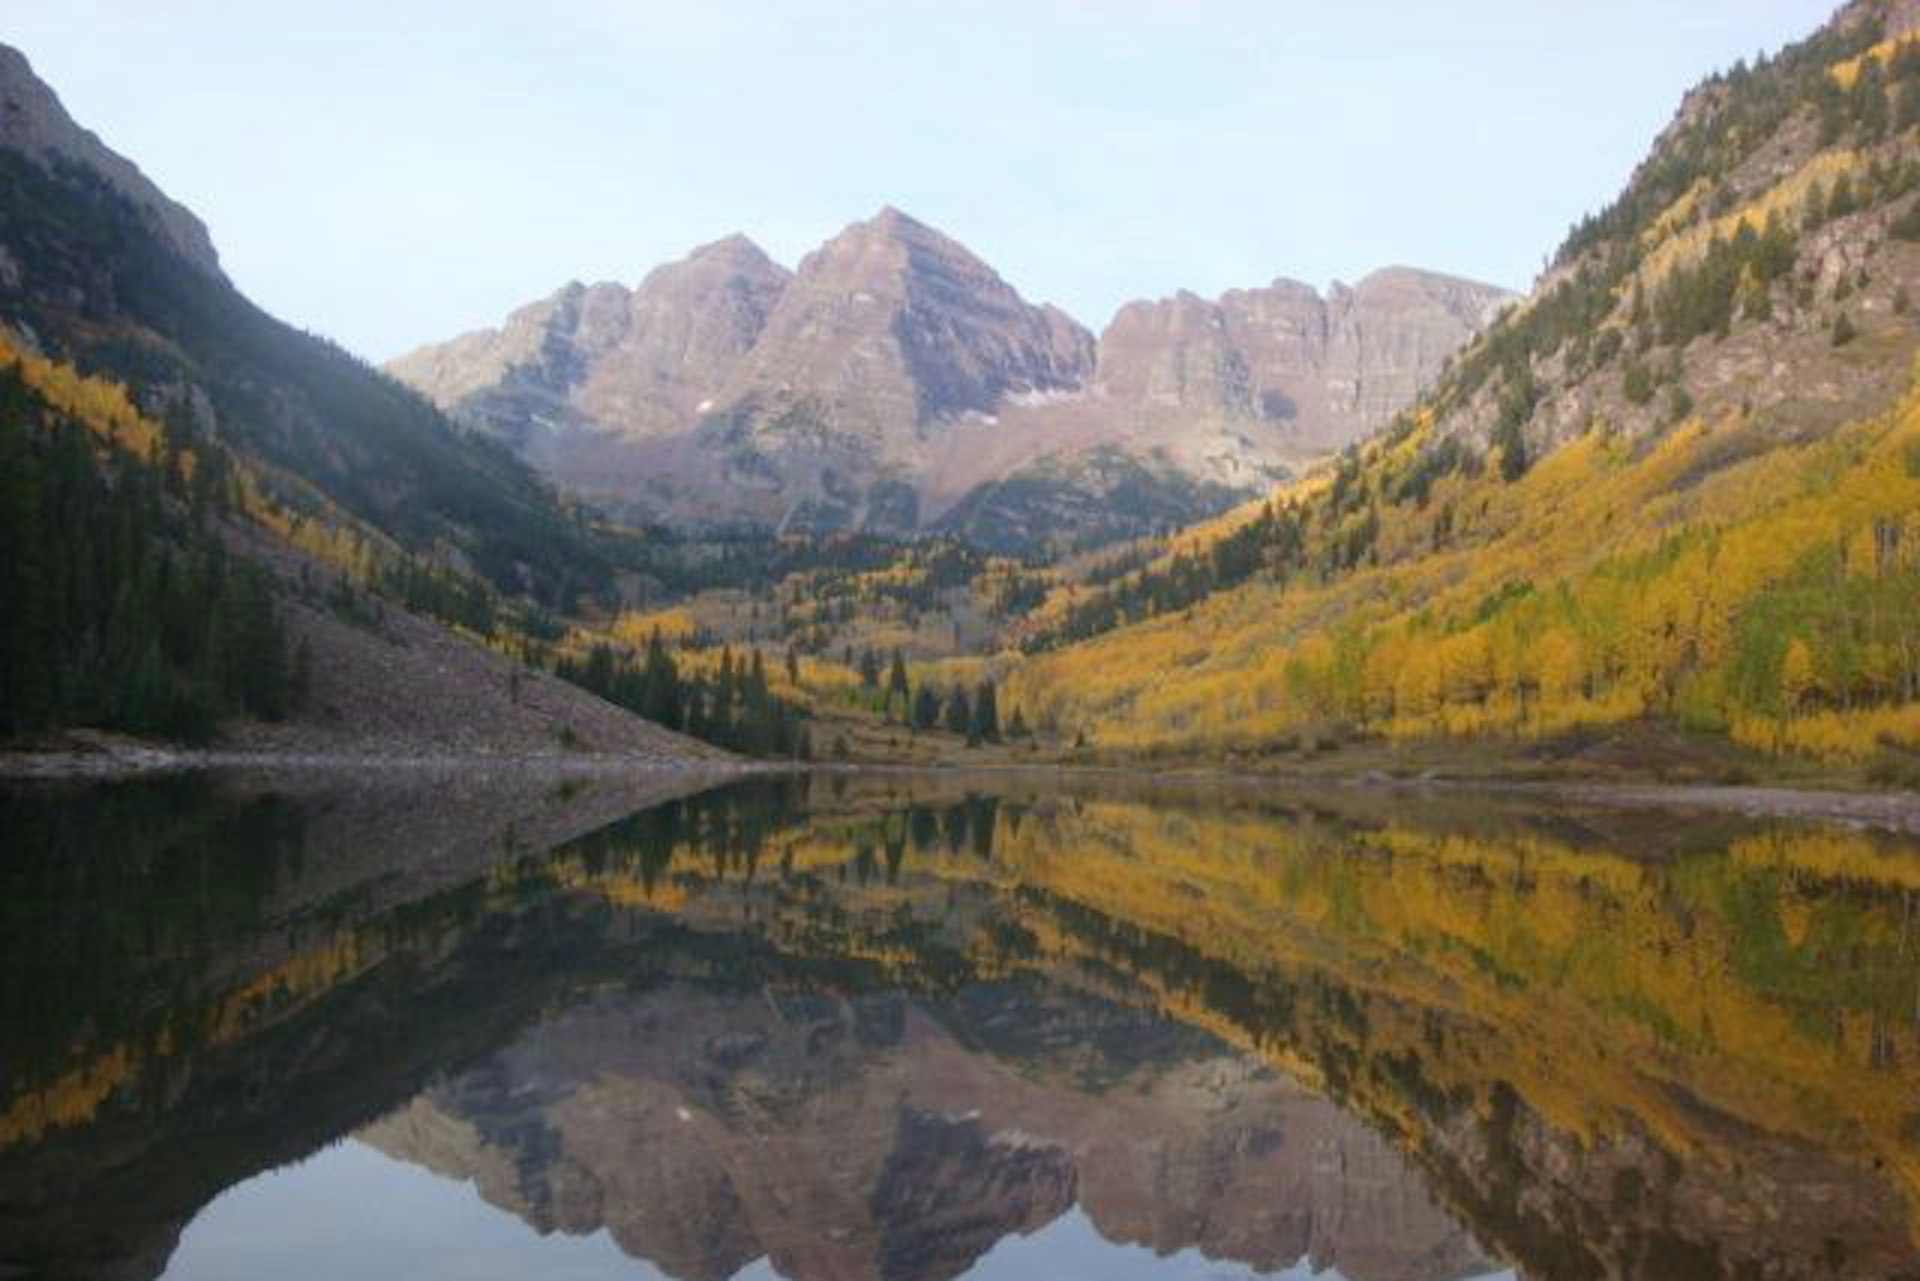 A lake near Aspen, Colorado, in autumn. Image by Kashif Khan / Lonely Planet